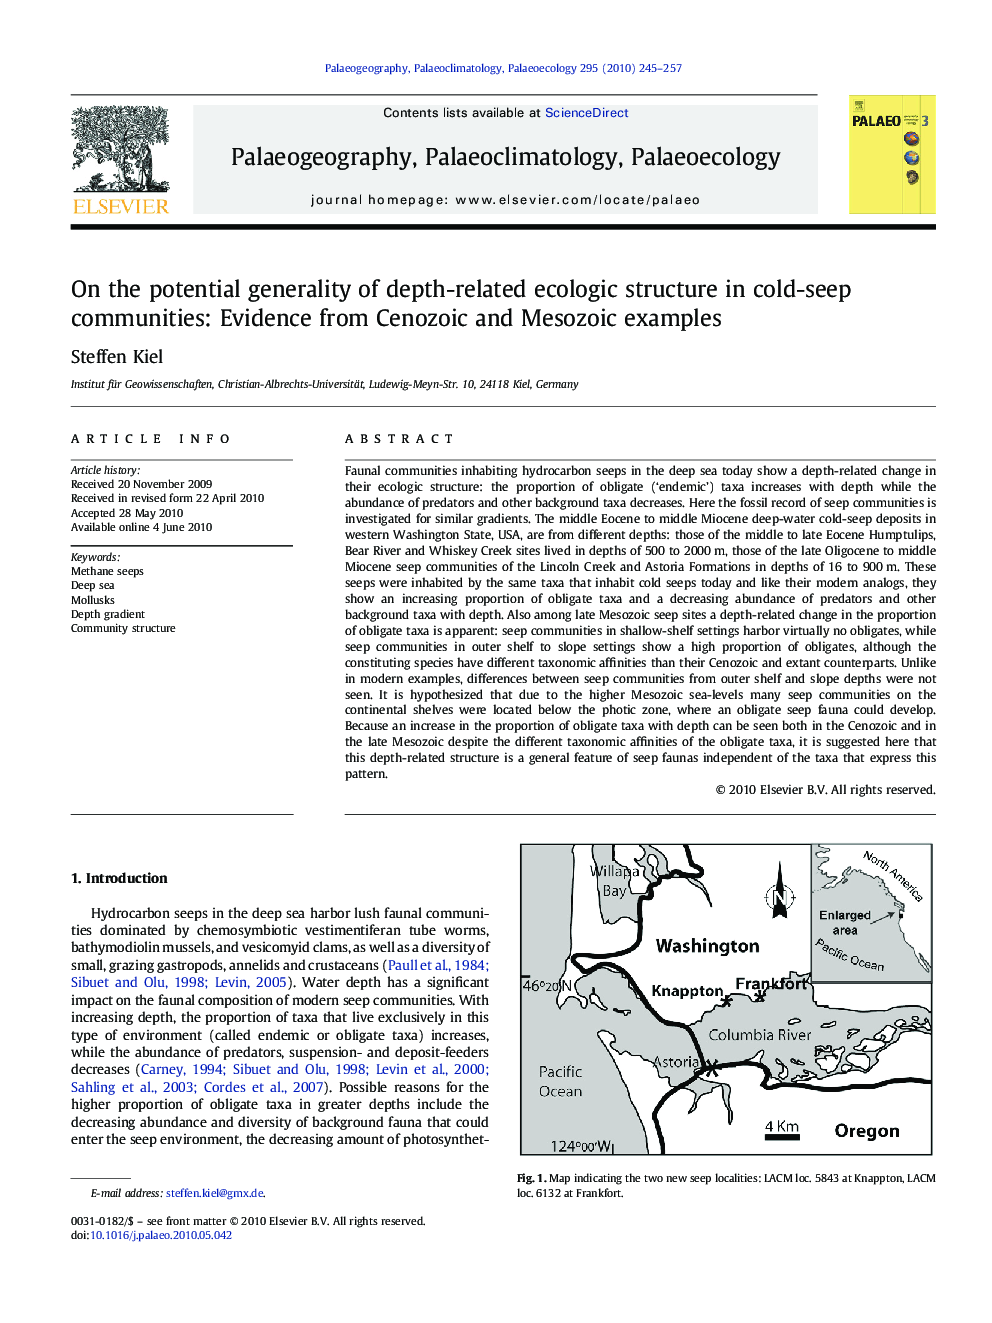 On the potential generality of depth-related ecologic structure in cold-seep communities: Evidence from Cenozoic and Mesozoic examples